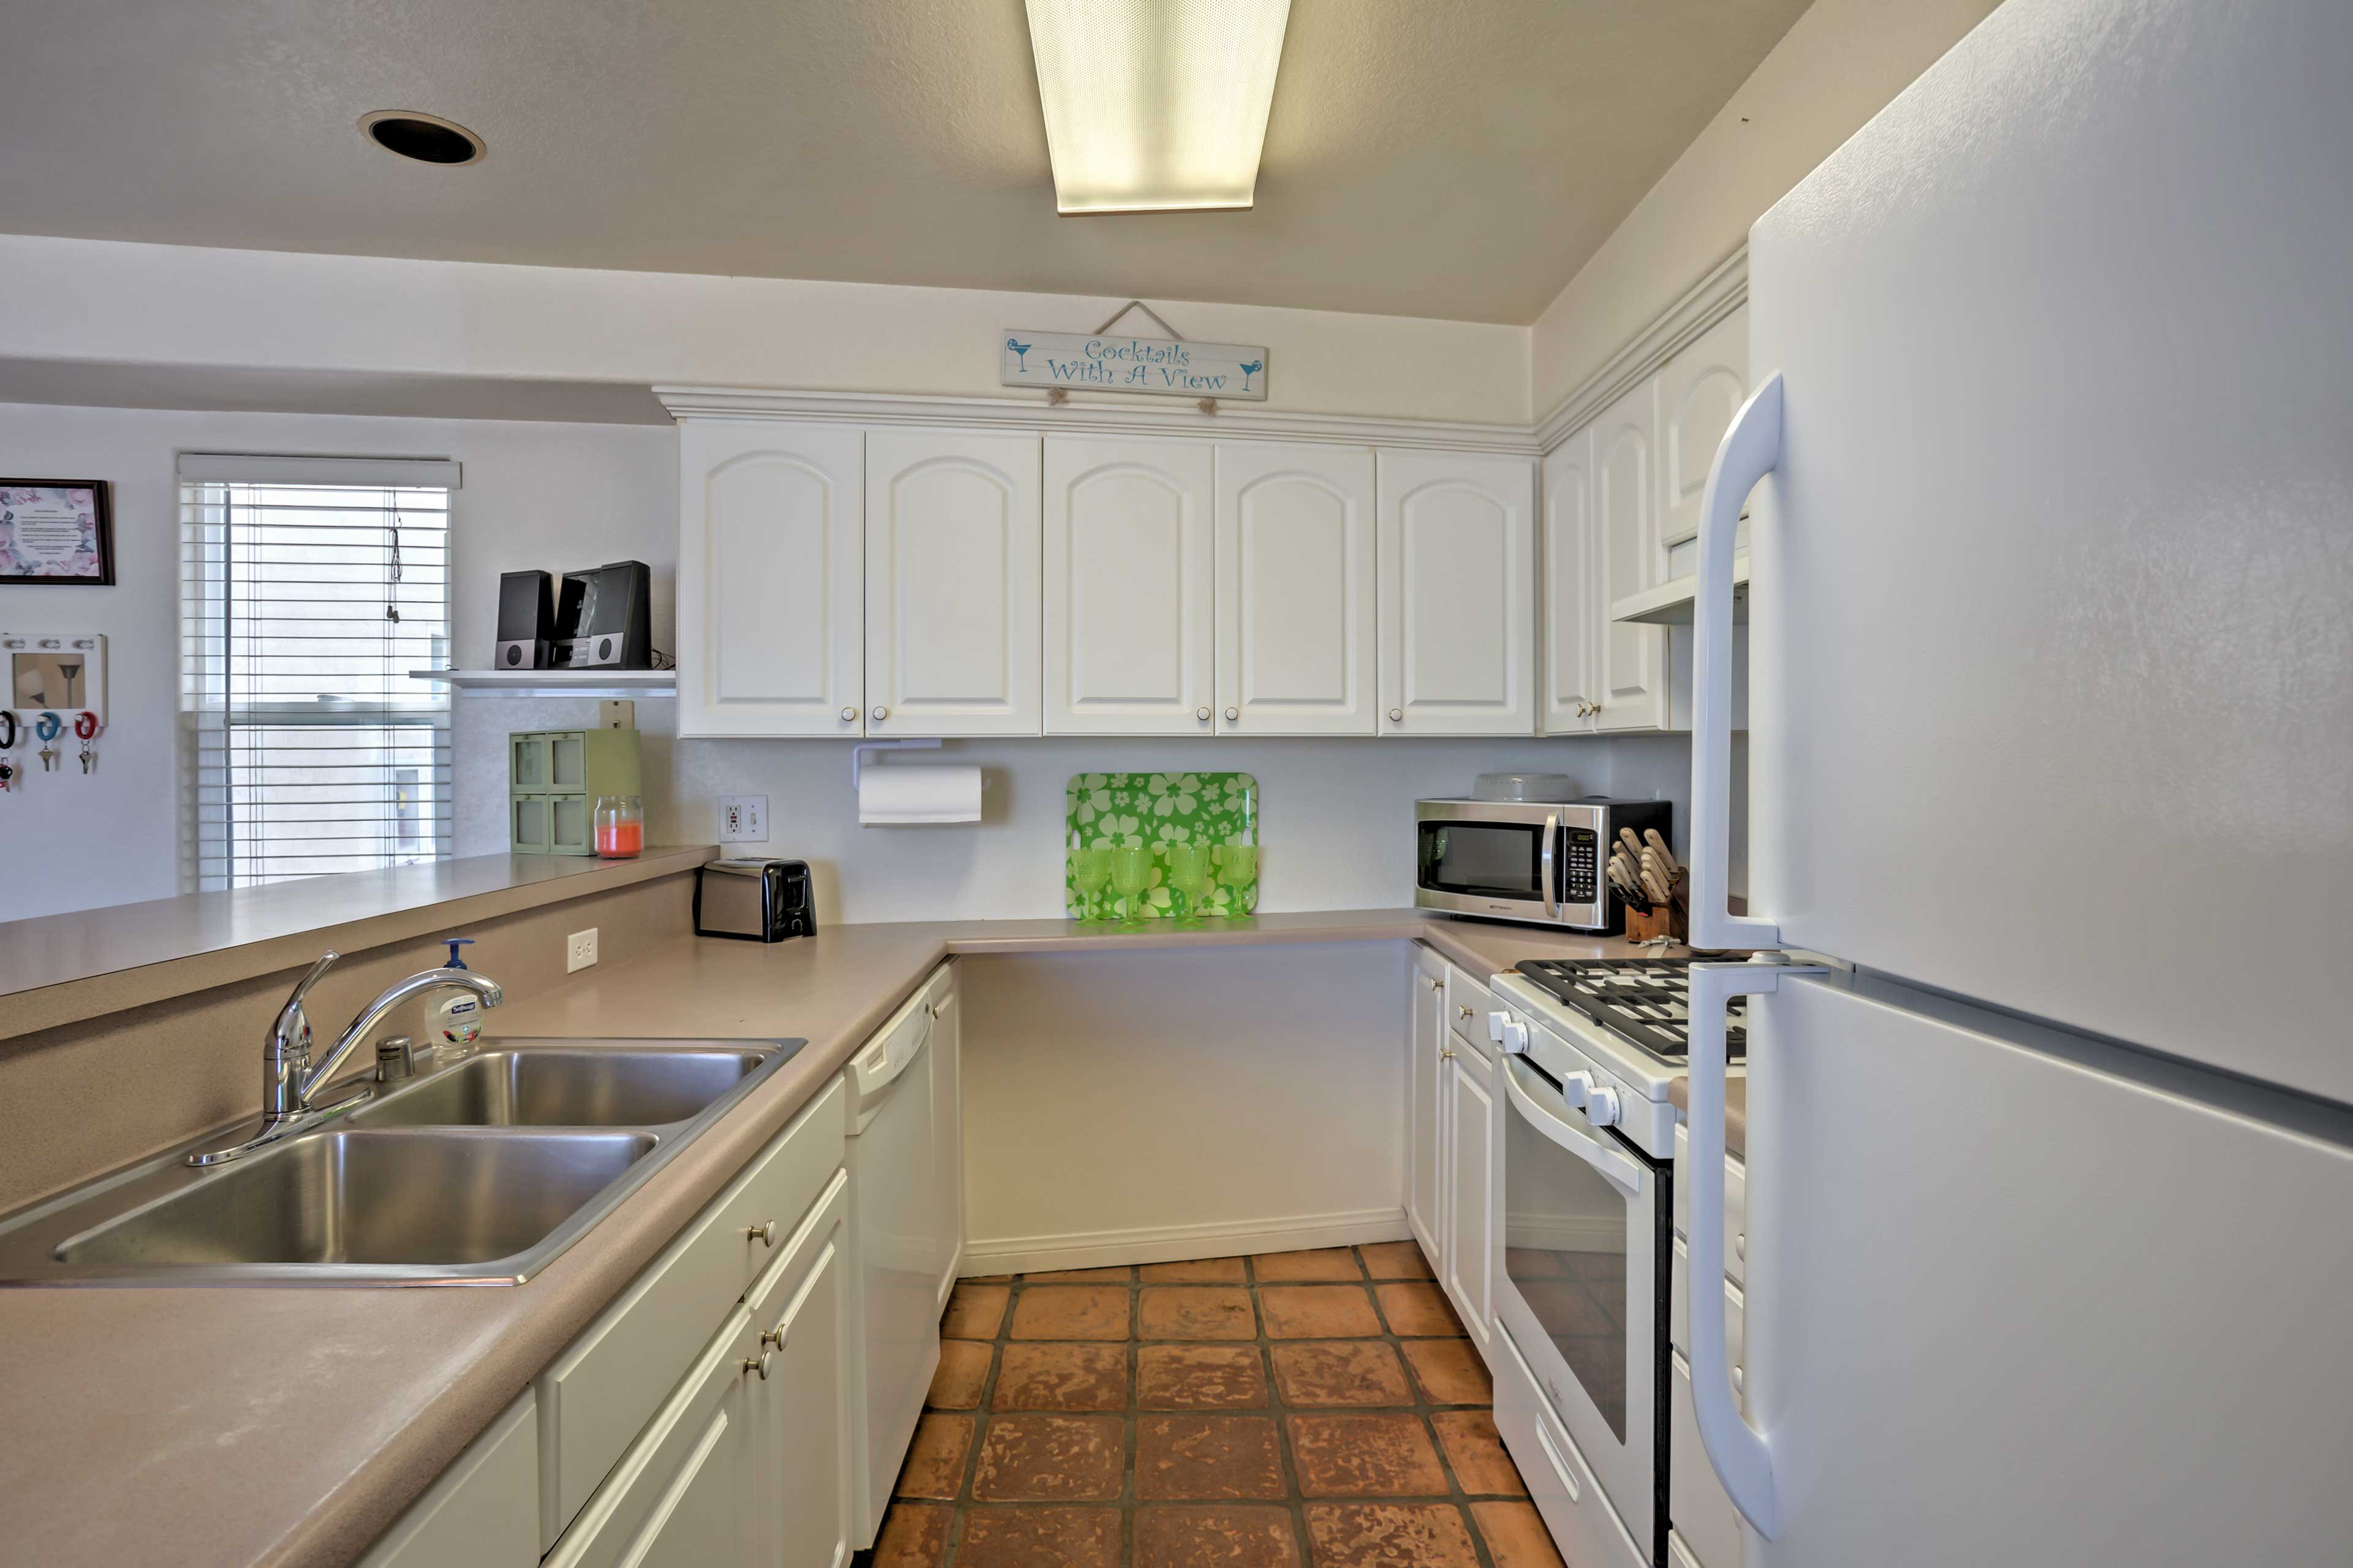 You'll love preparing day time snacks and meals in this fully equipped kitchen.